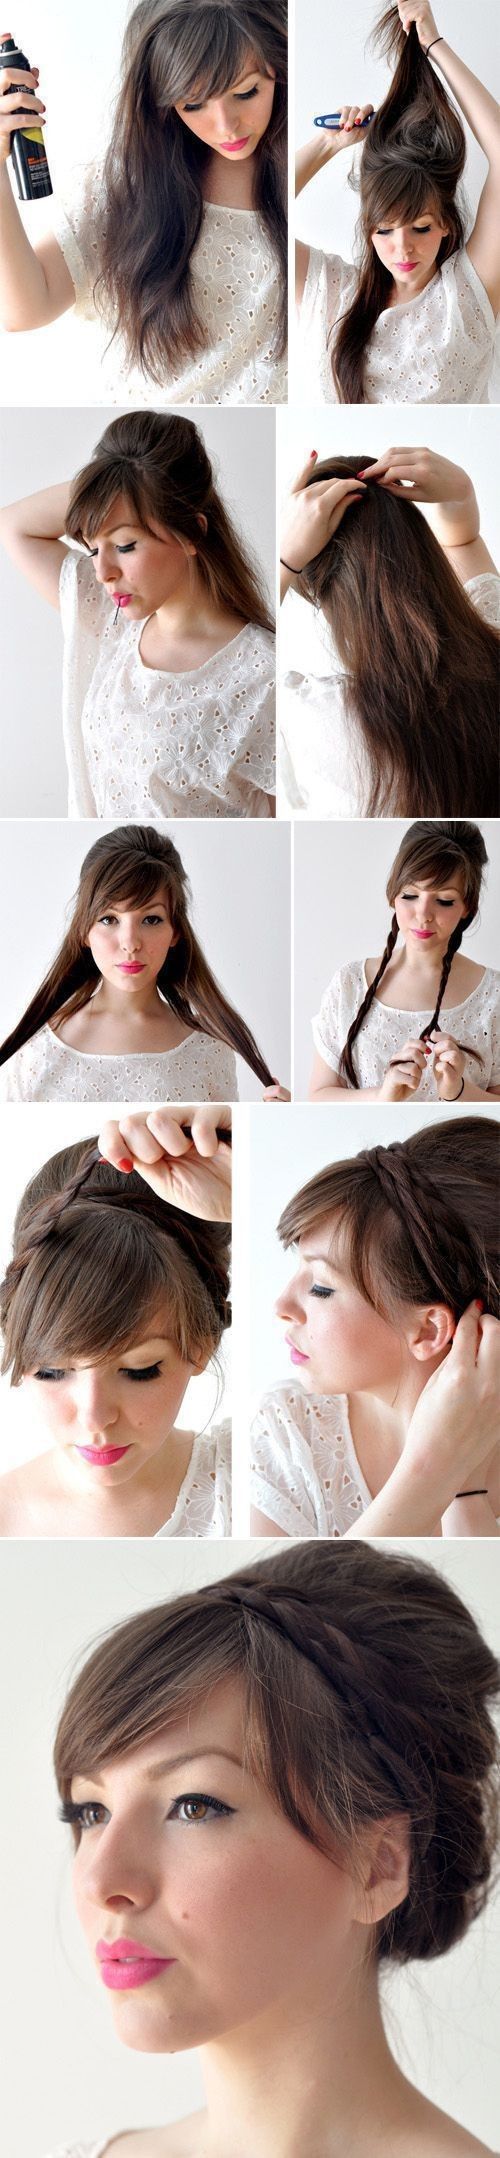 Easy To Do Hairstyles | Easy Step By Step Hairstyles